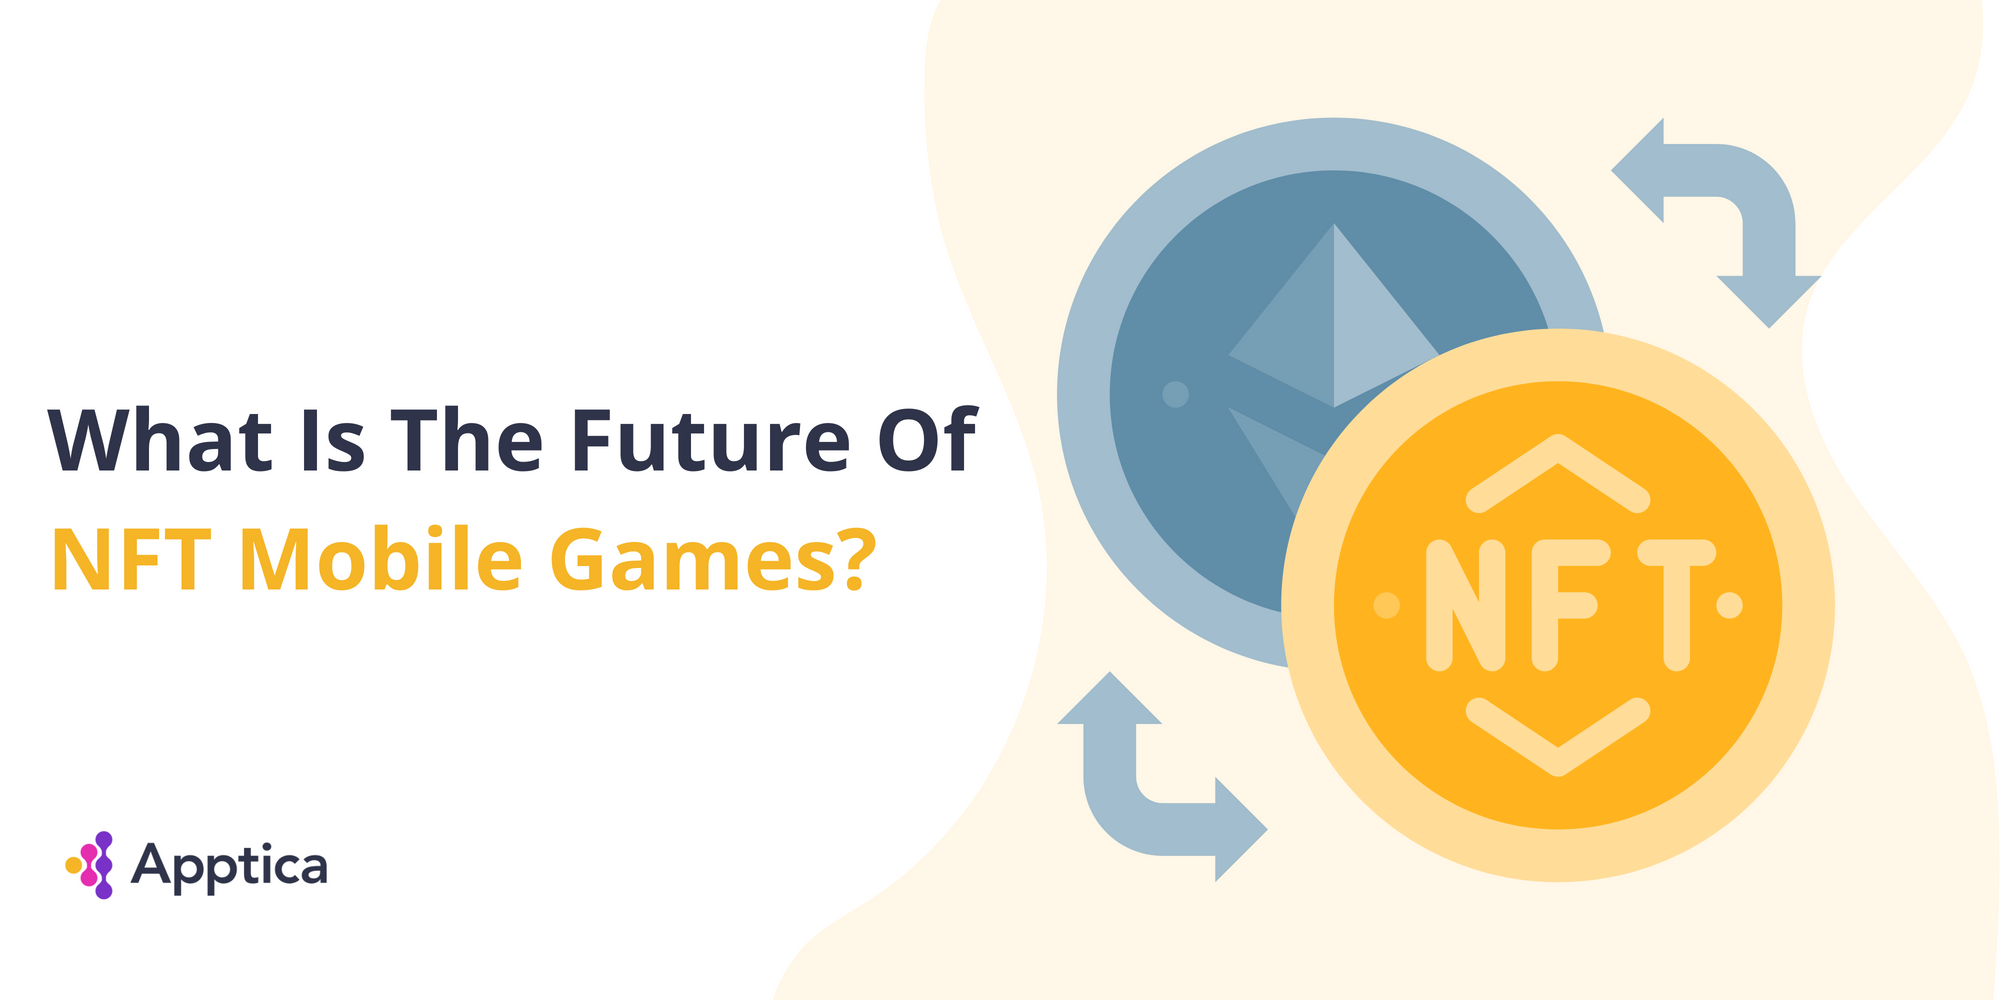 What Is The Future Of NFT Mobile Games?